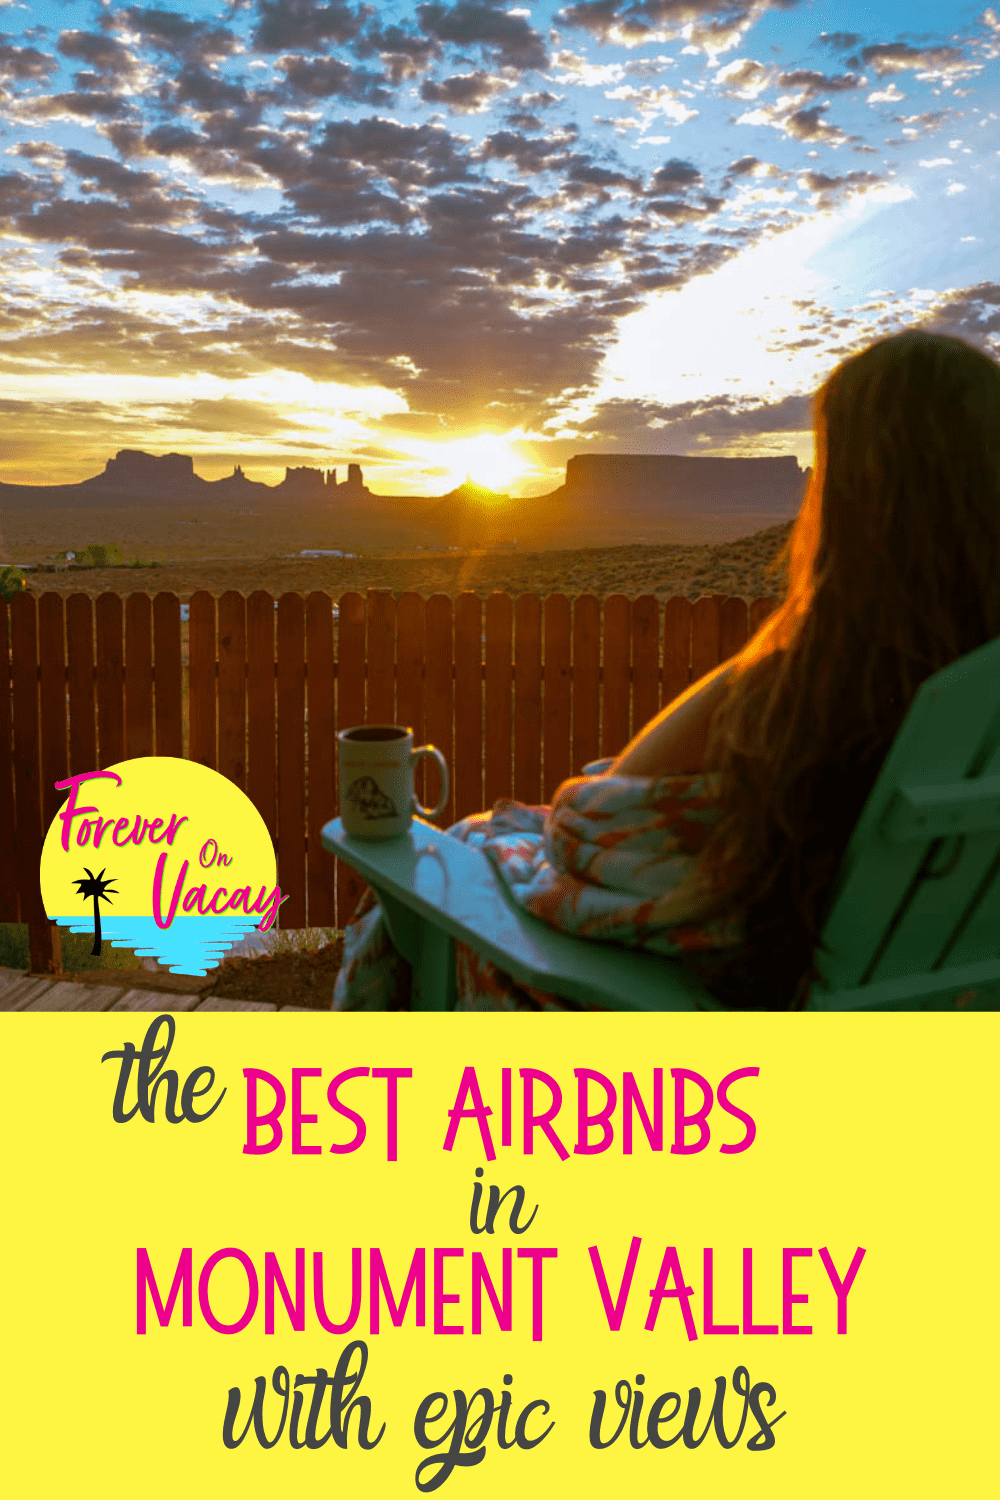 Pin this: Best Airbnbs in Monument Valley with epic views